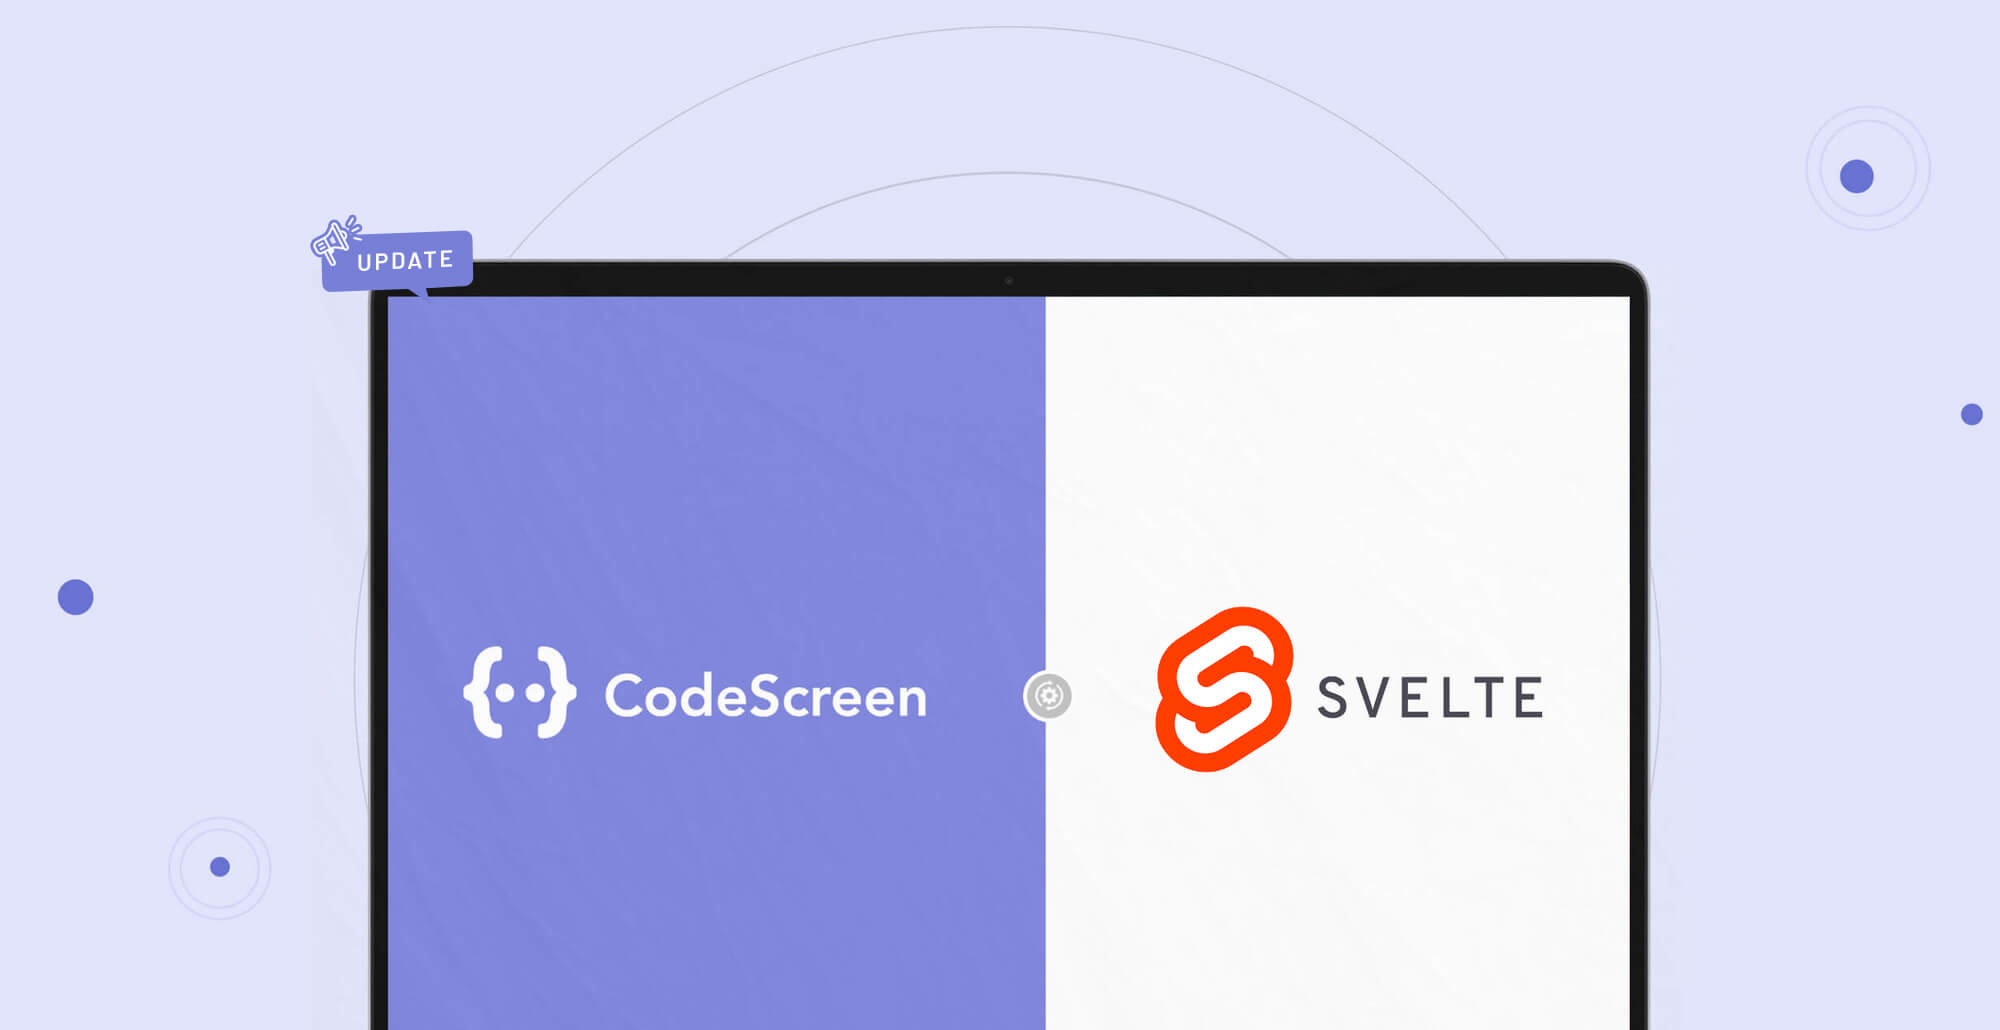 CodeScreen now supports Svelte for Custom Assessments